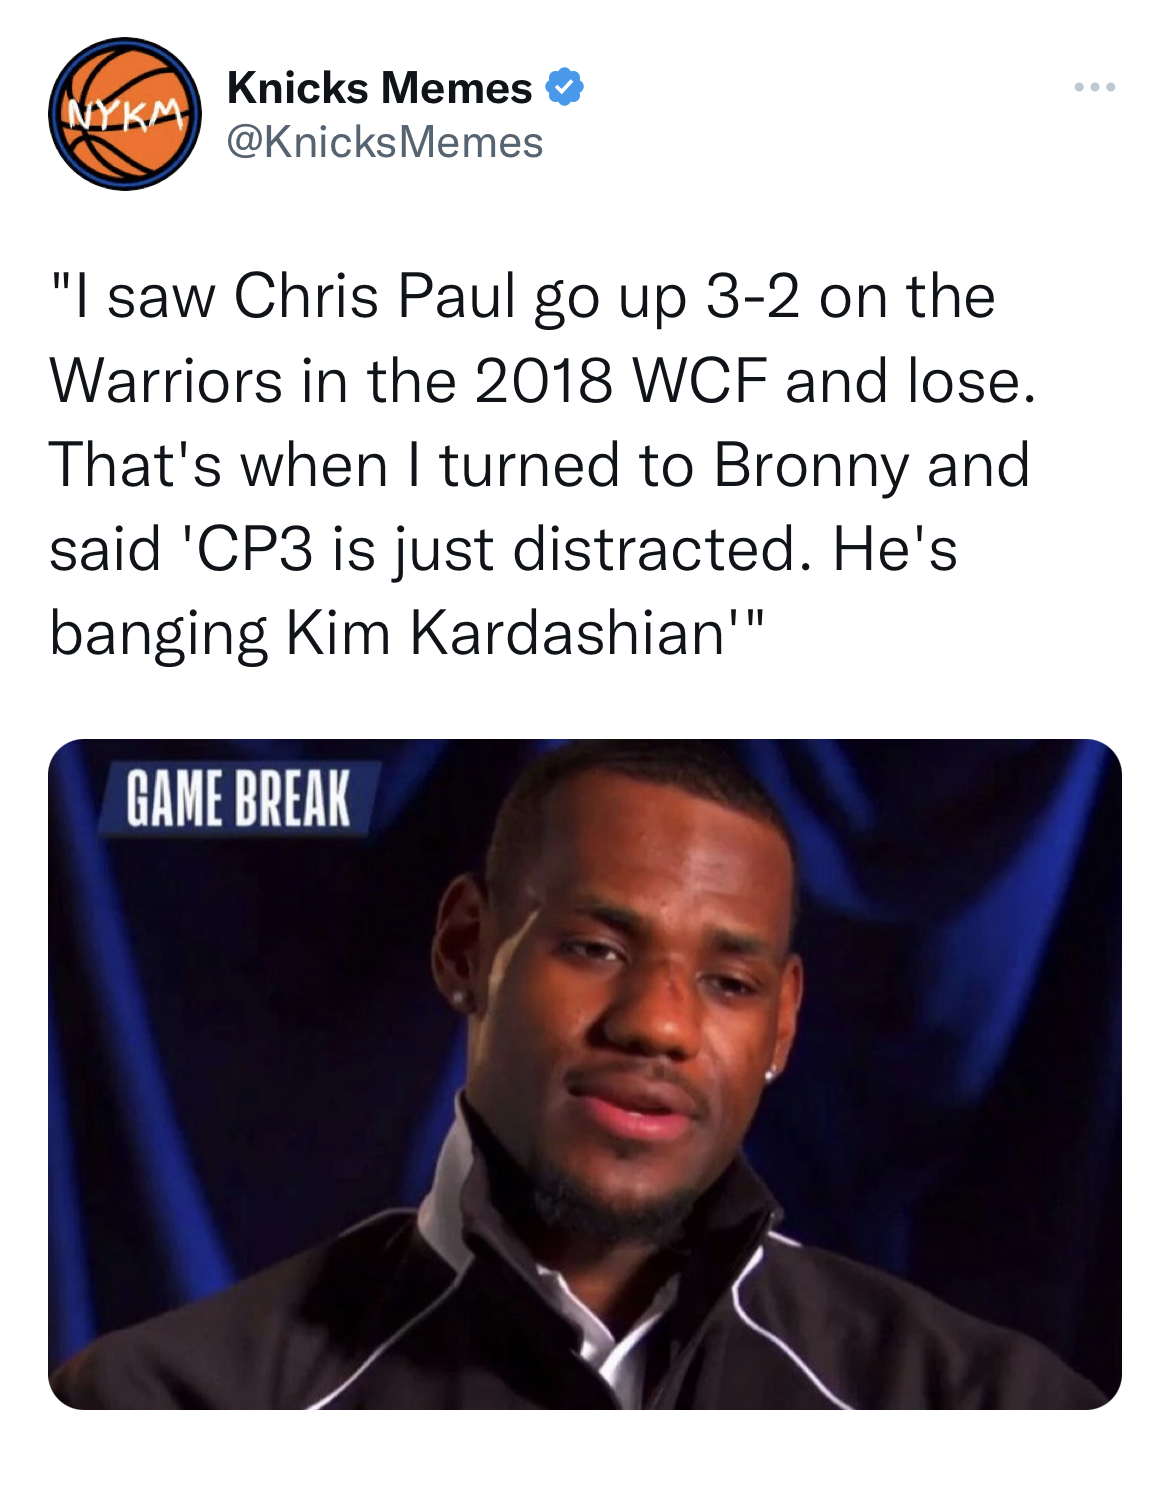 Chris Paul and Kim K memes - photo caption - Nykm Knicks Memes "I saw Chris Paul go up 32 on the Warriors in the 2018 Wcf and lose. That's when I turned to Bronny and said 'CP3 is just distracted. He's banging Kim Kardashian"" Game Break